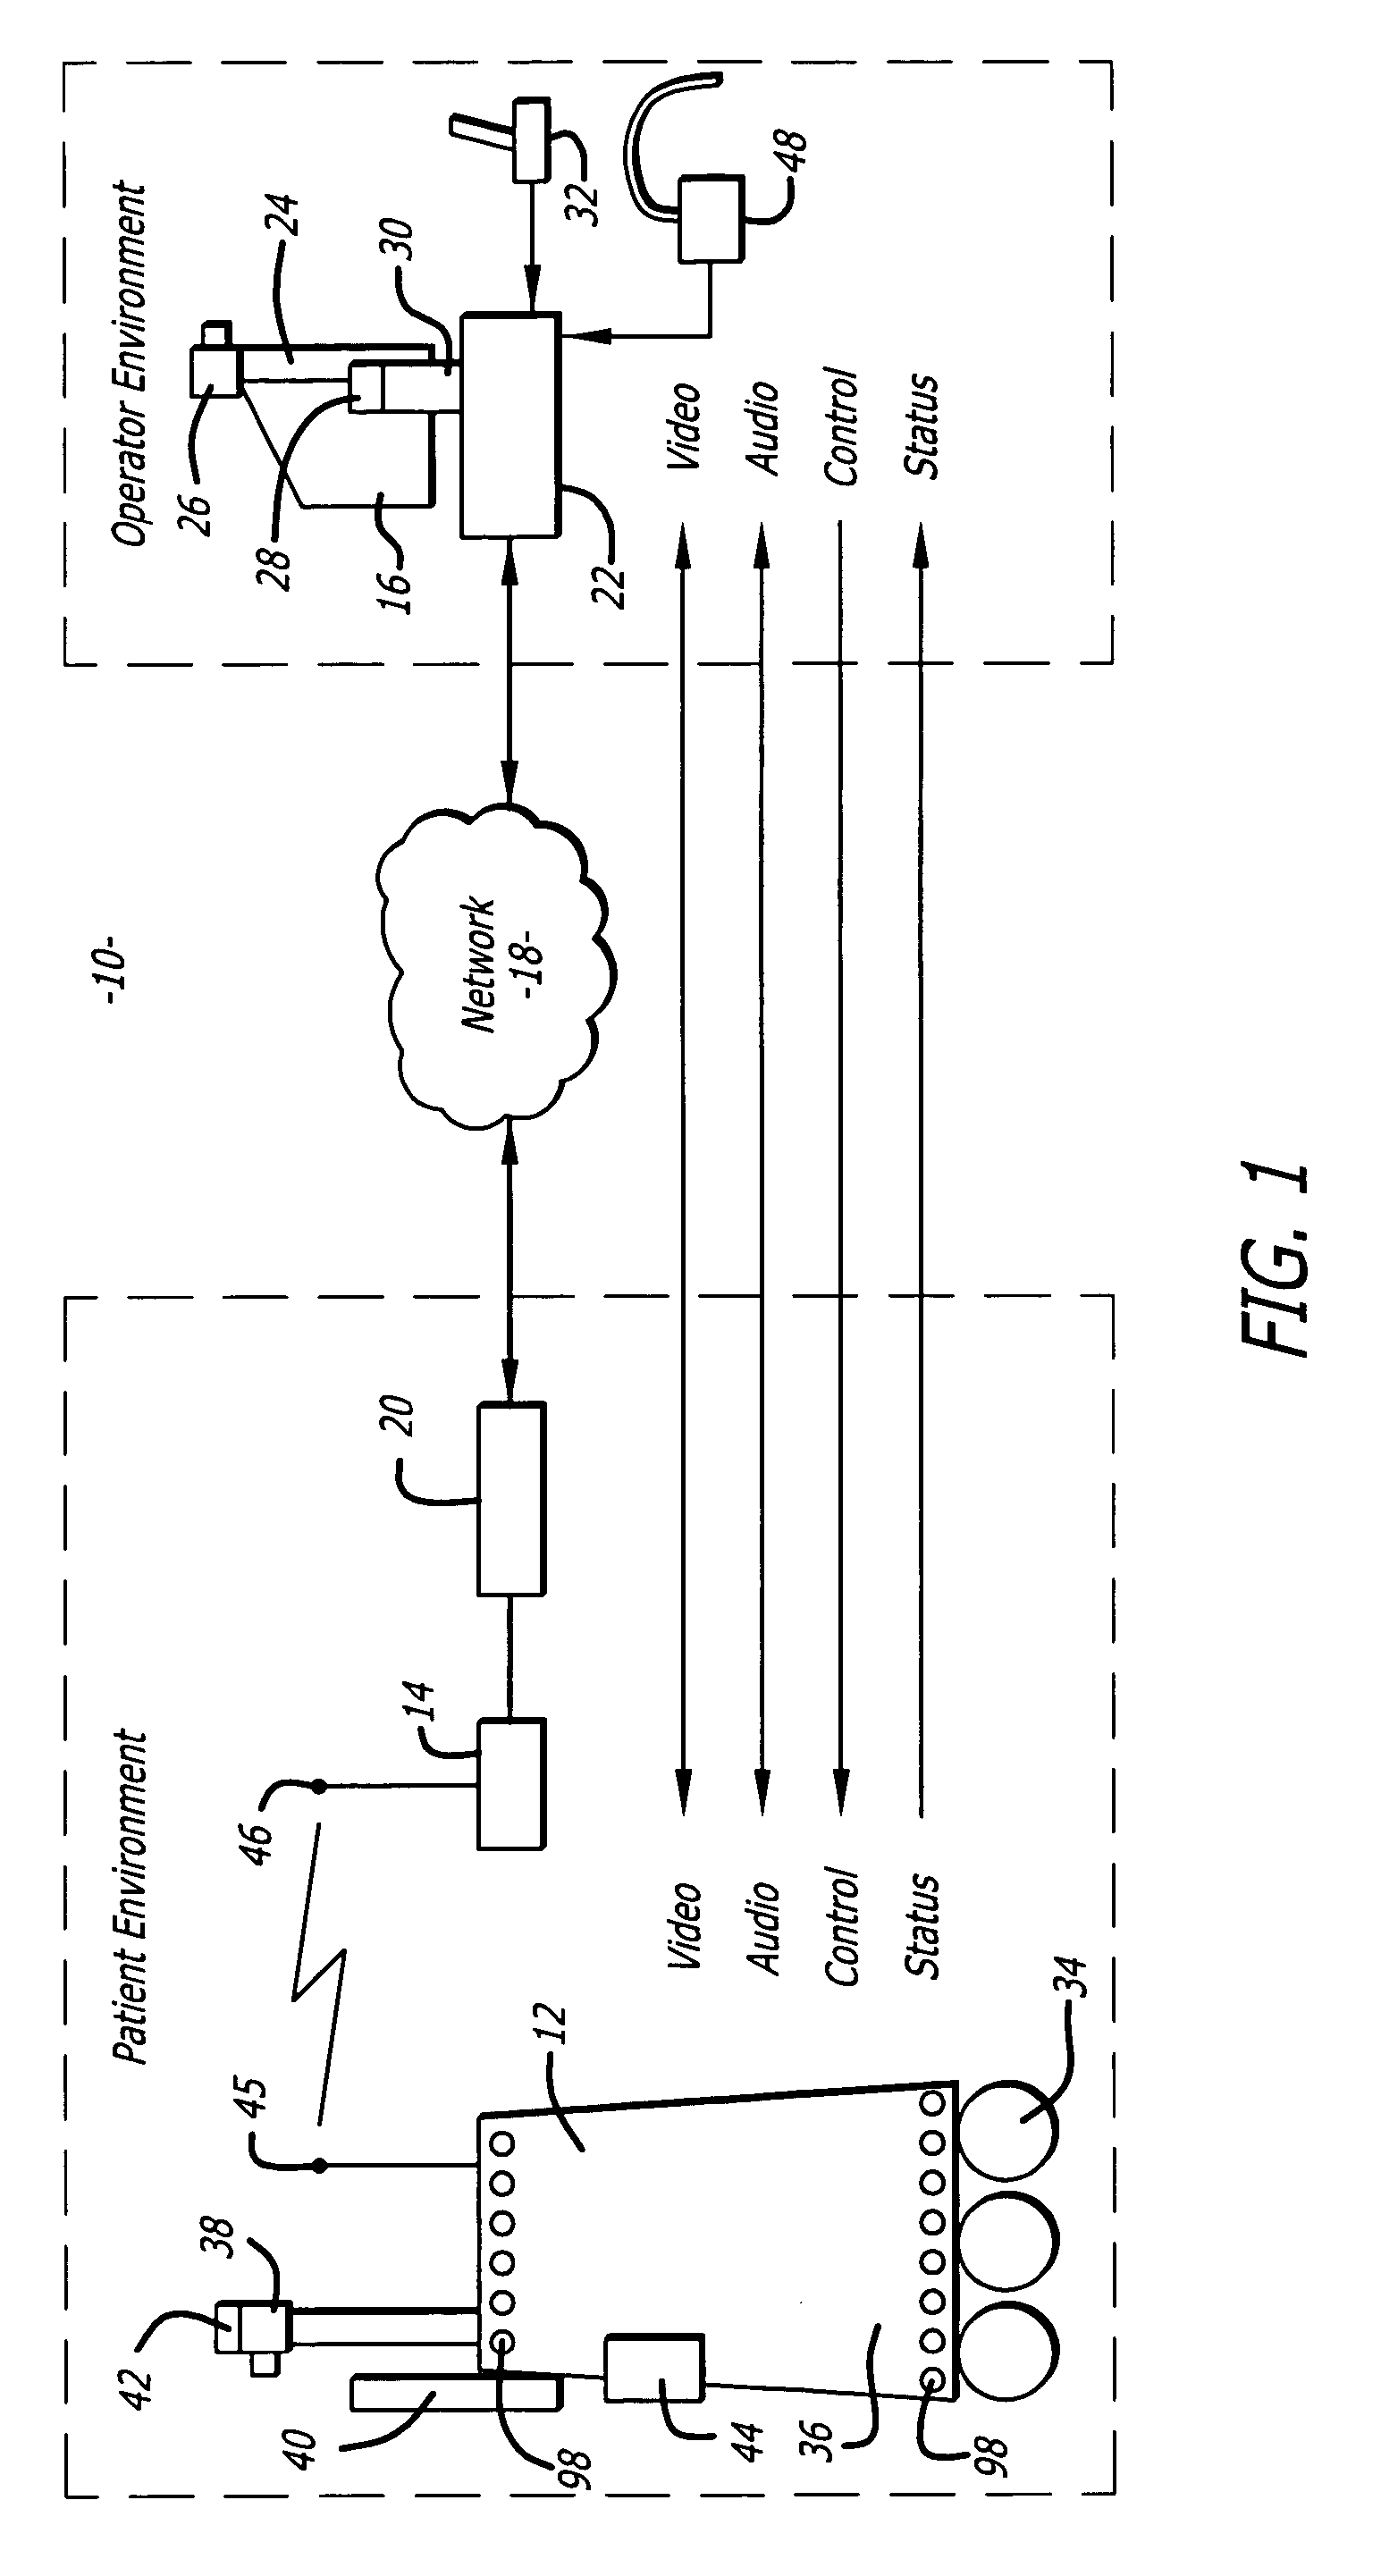 Medical tele-robotic system with a head worn device